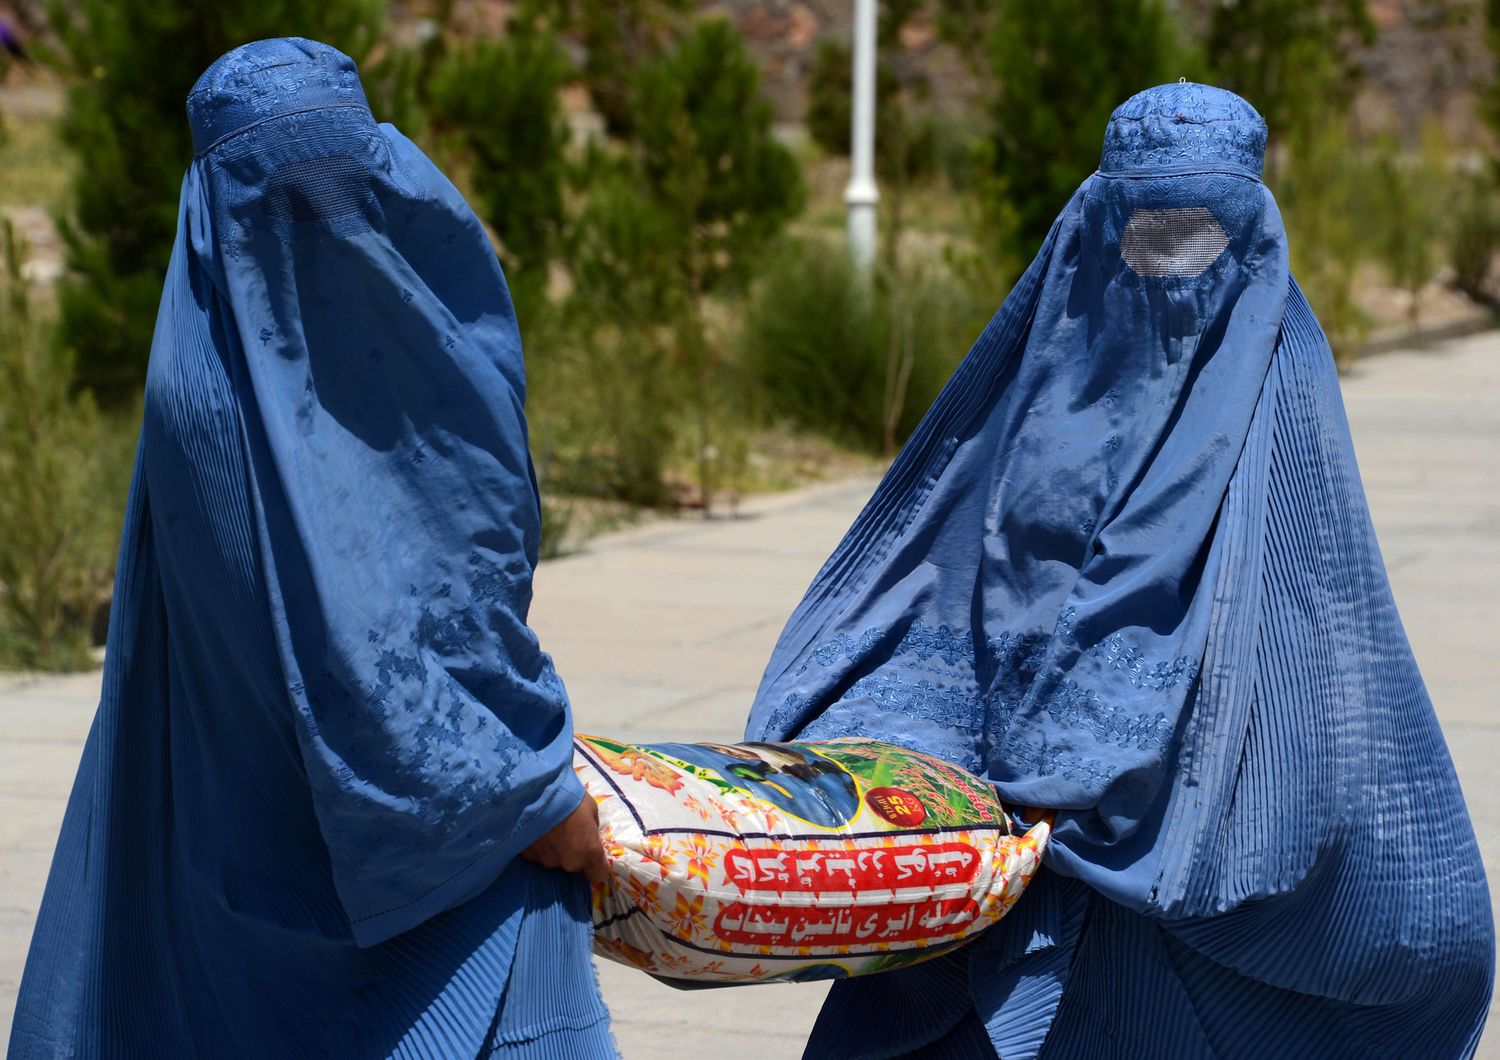 Donne in Afghanistan indossano il burqa (Afp)&nbsp;